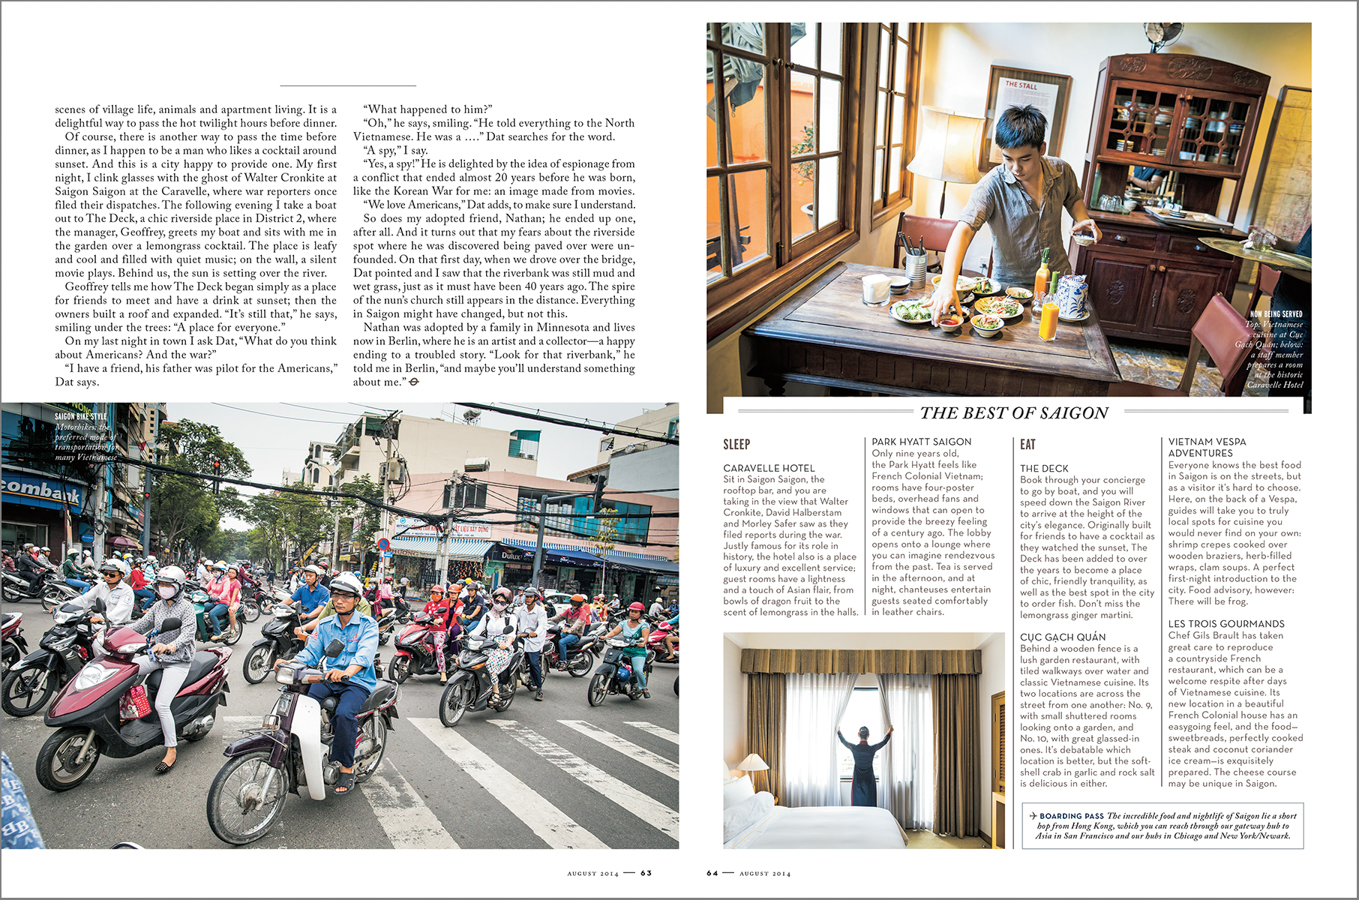 From a feature travel story on Ho Chi Minh City for United Airlines' Rhapsody magazine.